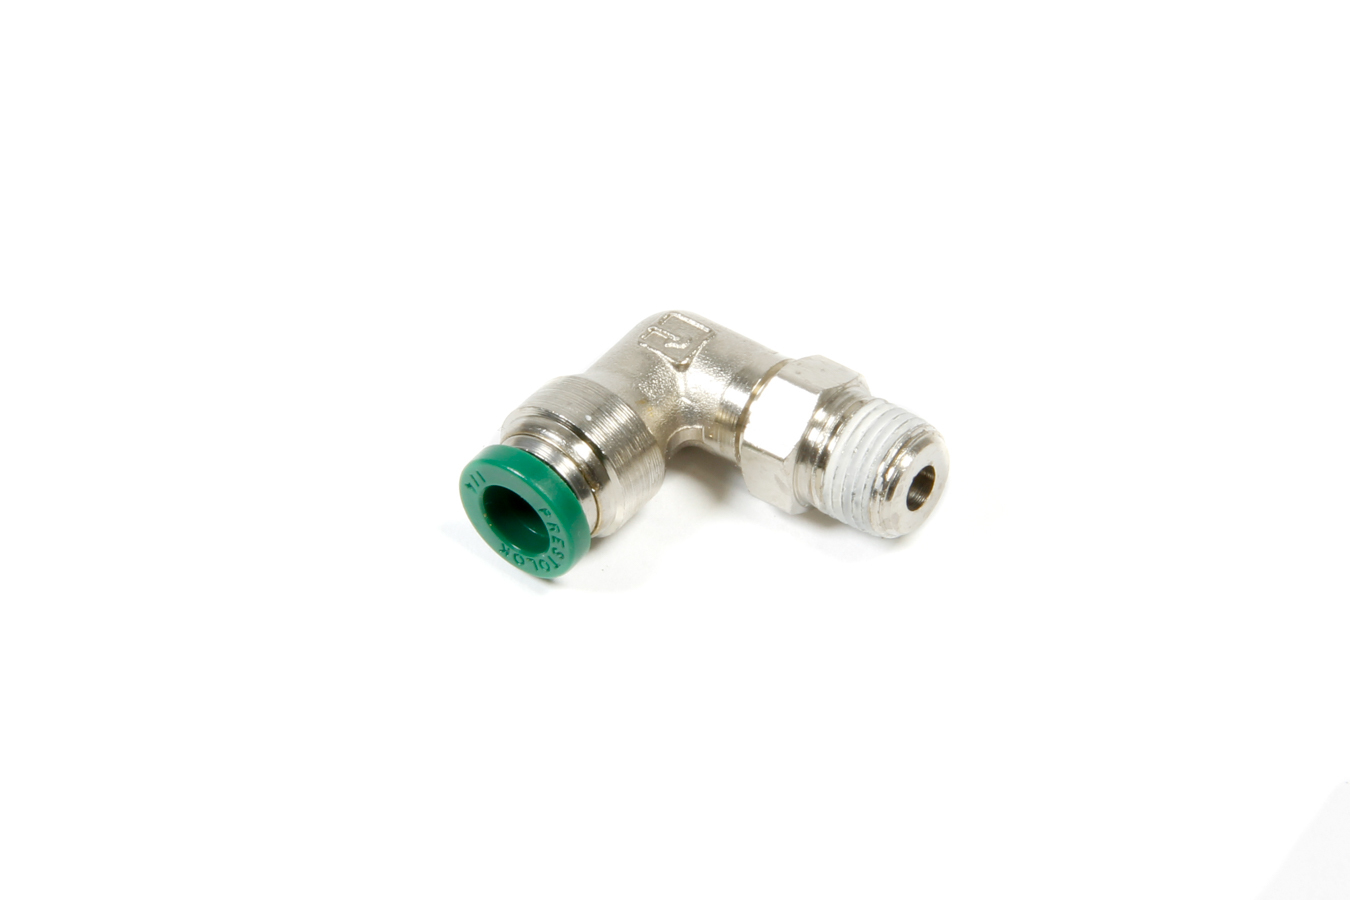 Shiftnoid PC300 Fitting, Adapter, 90 Degree, 1/8 in NPT Male to 1/4 in Hose Quick Disconnect, Steel, Zinc Oxide, Each